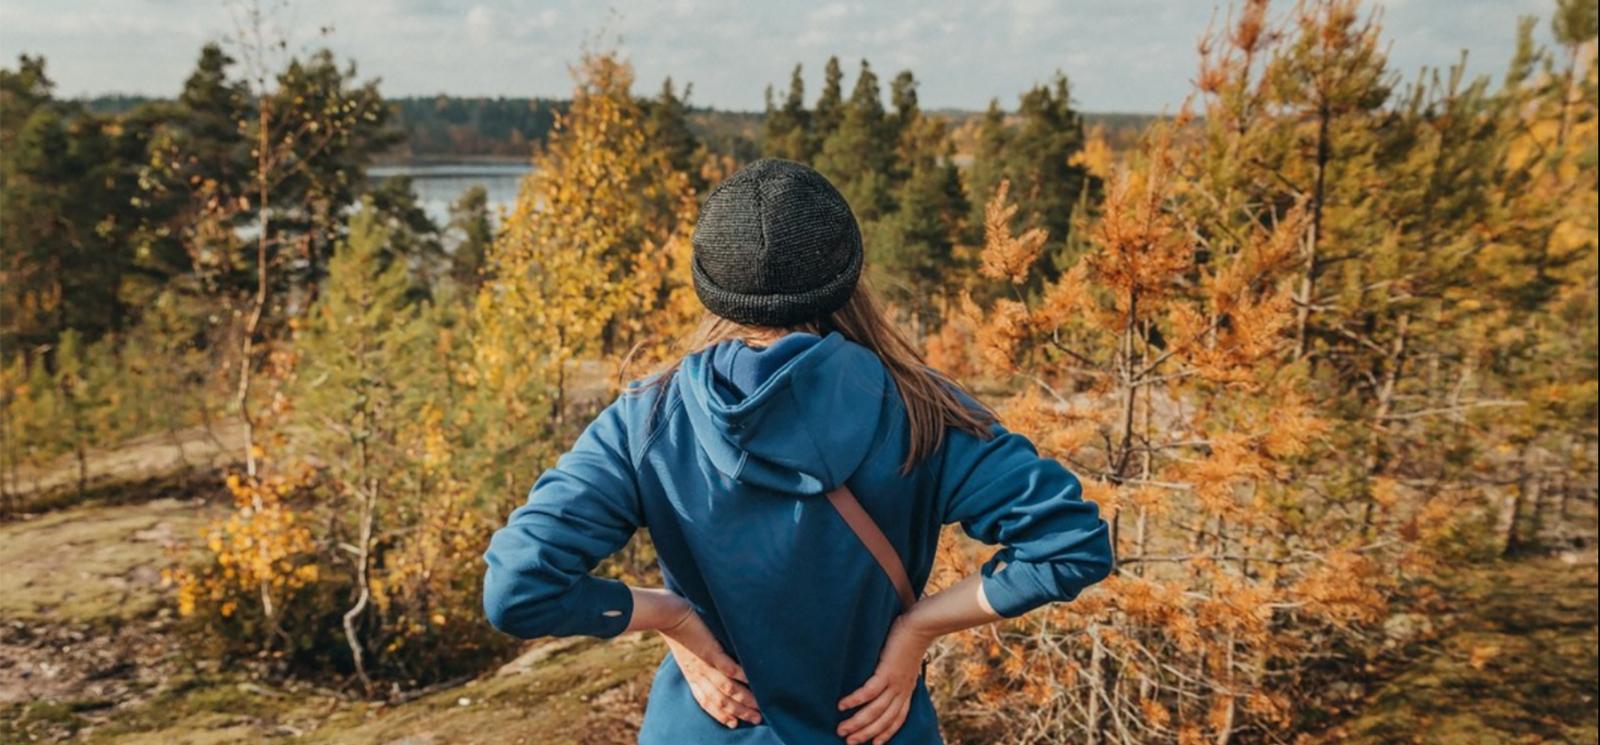 A woman on a hike pausing to look at fall scenery (Instagram@baymontinngroton)